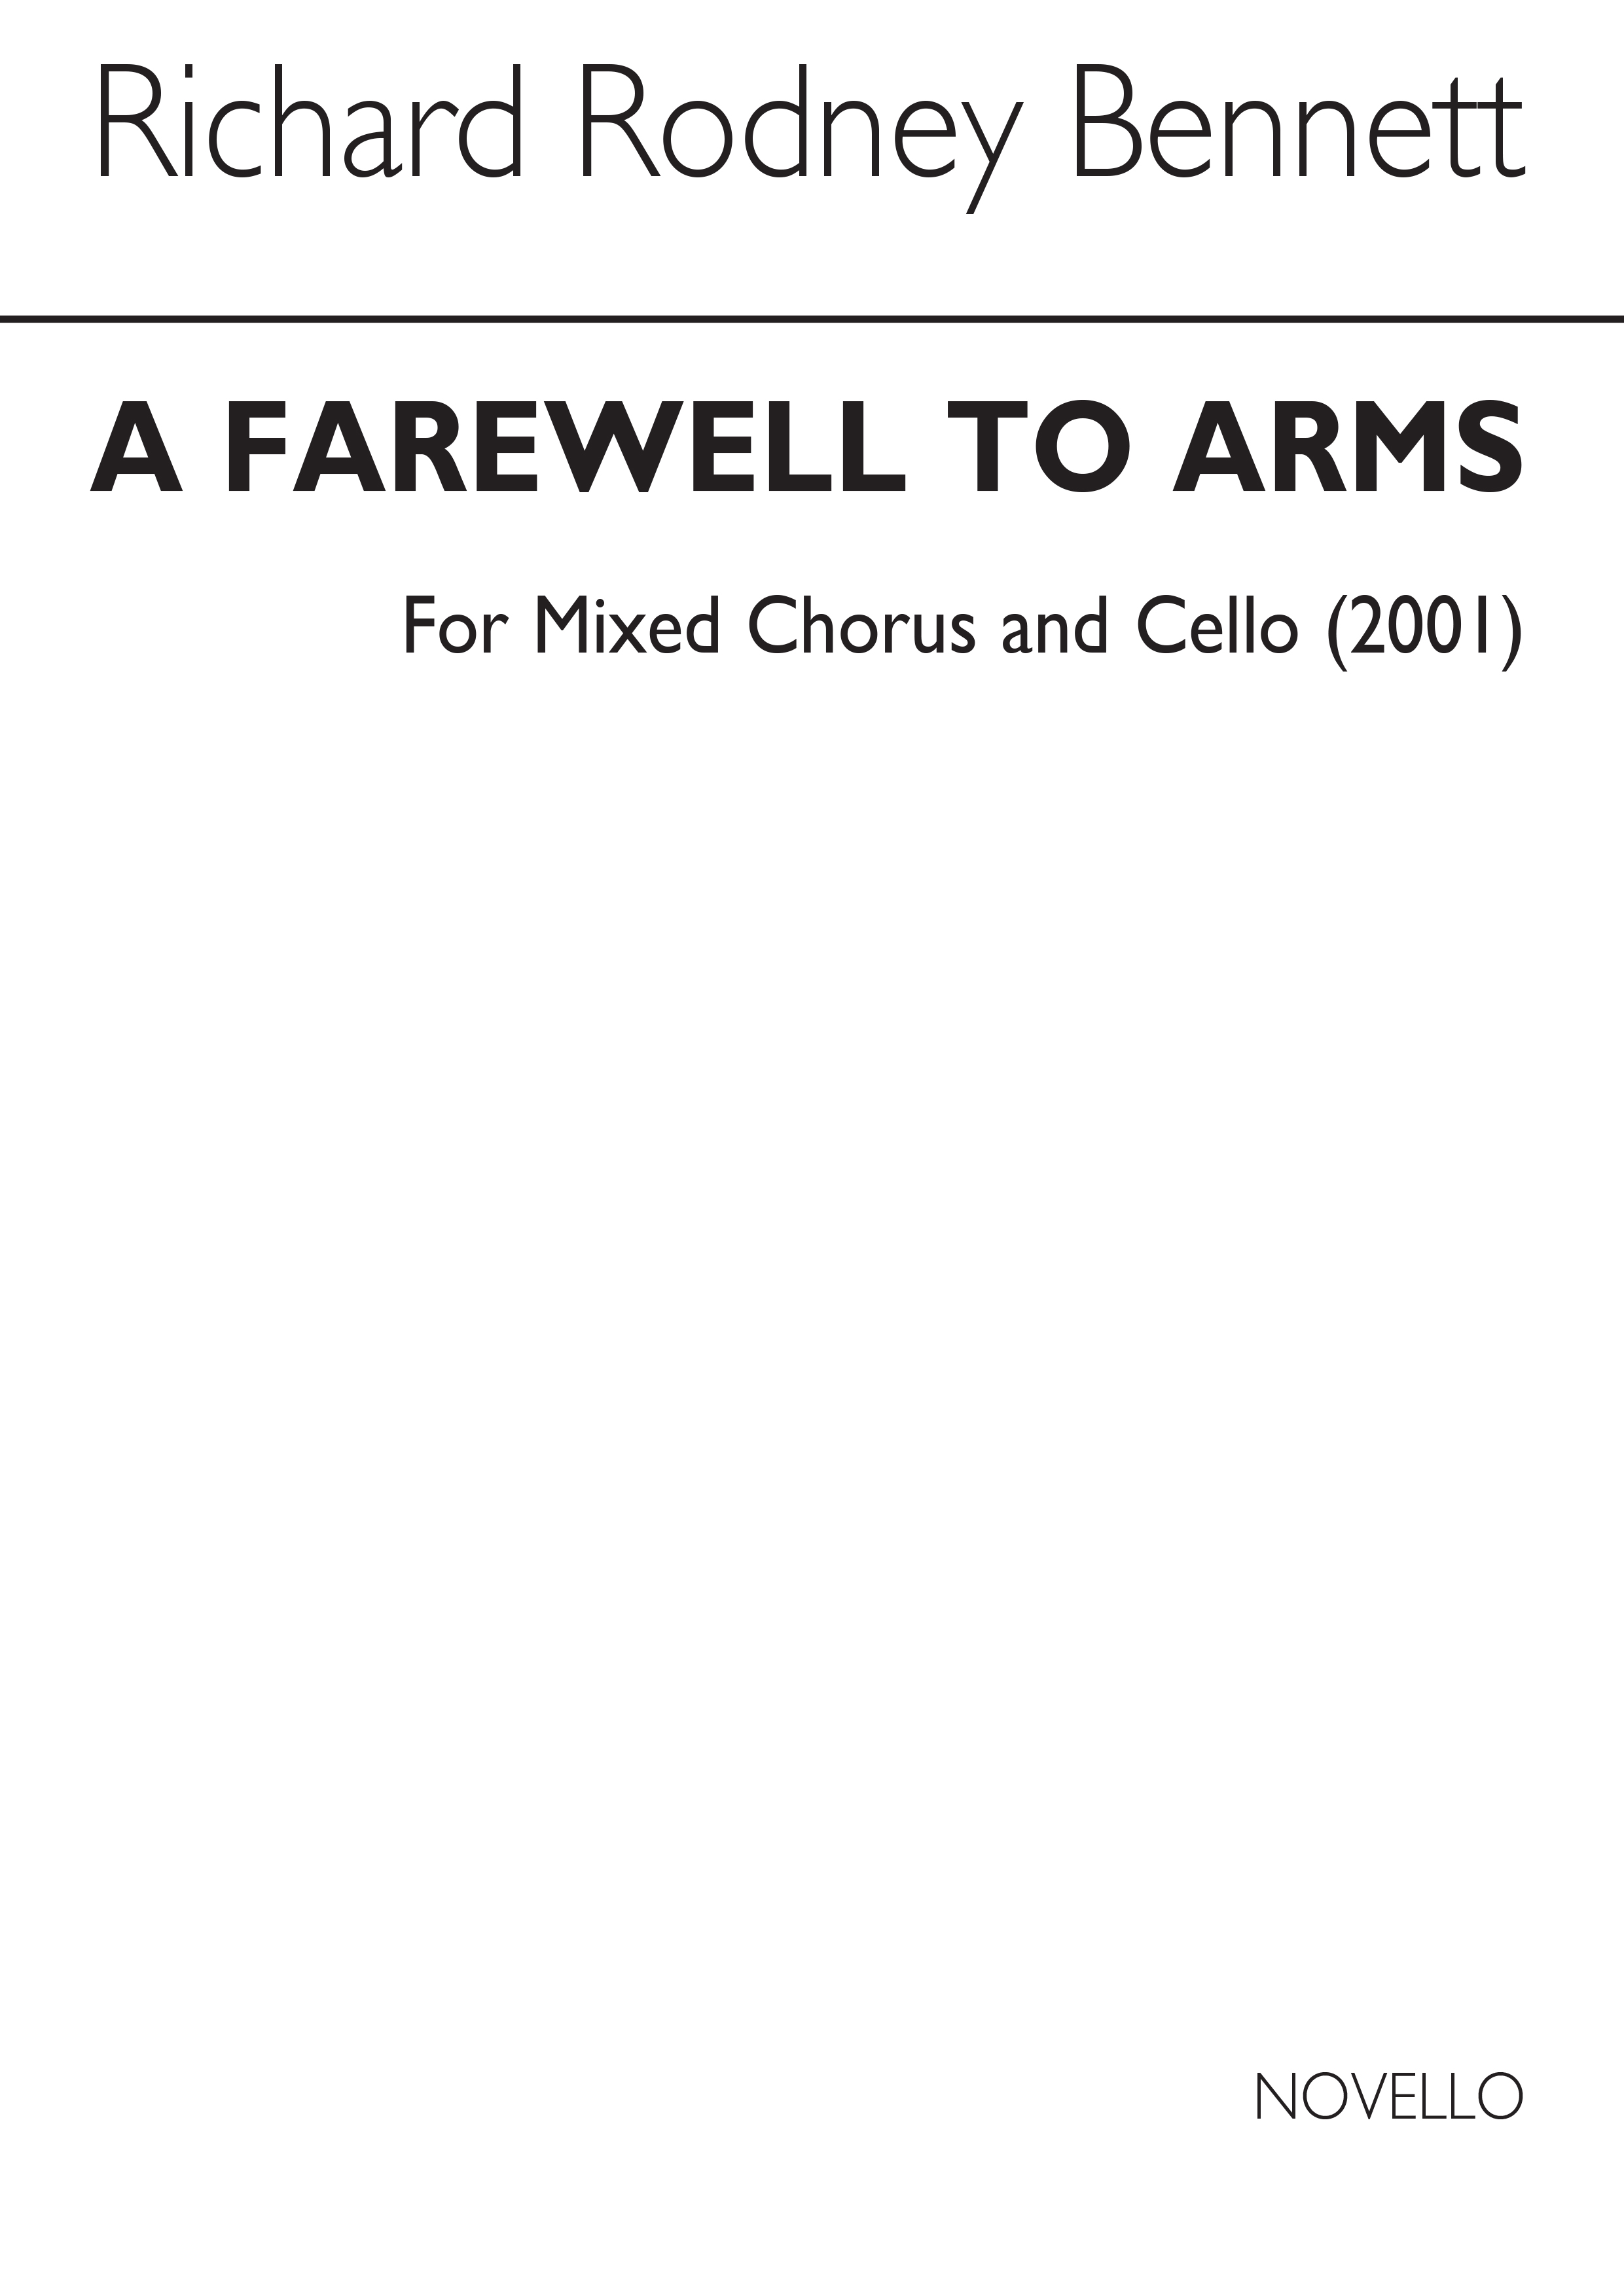 RR Bennett: A Farewell To Arms for SATB Chorus and Cello